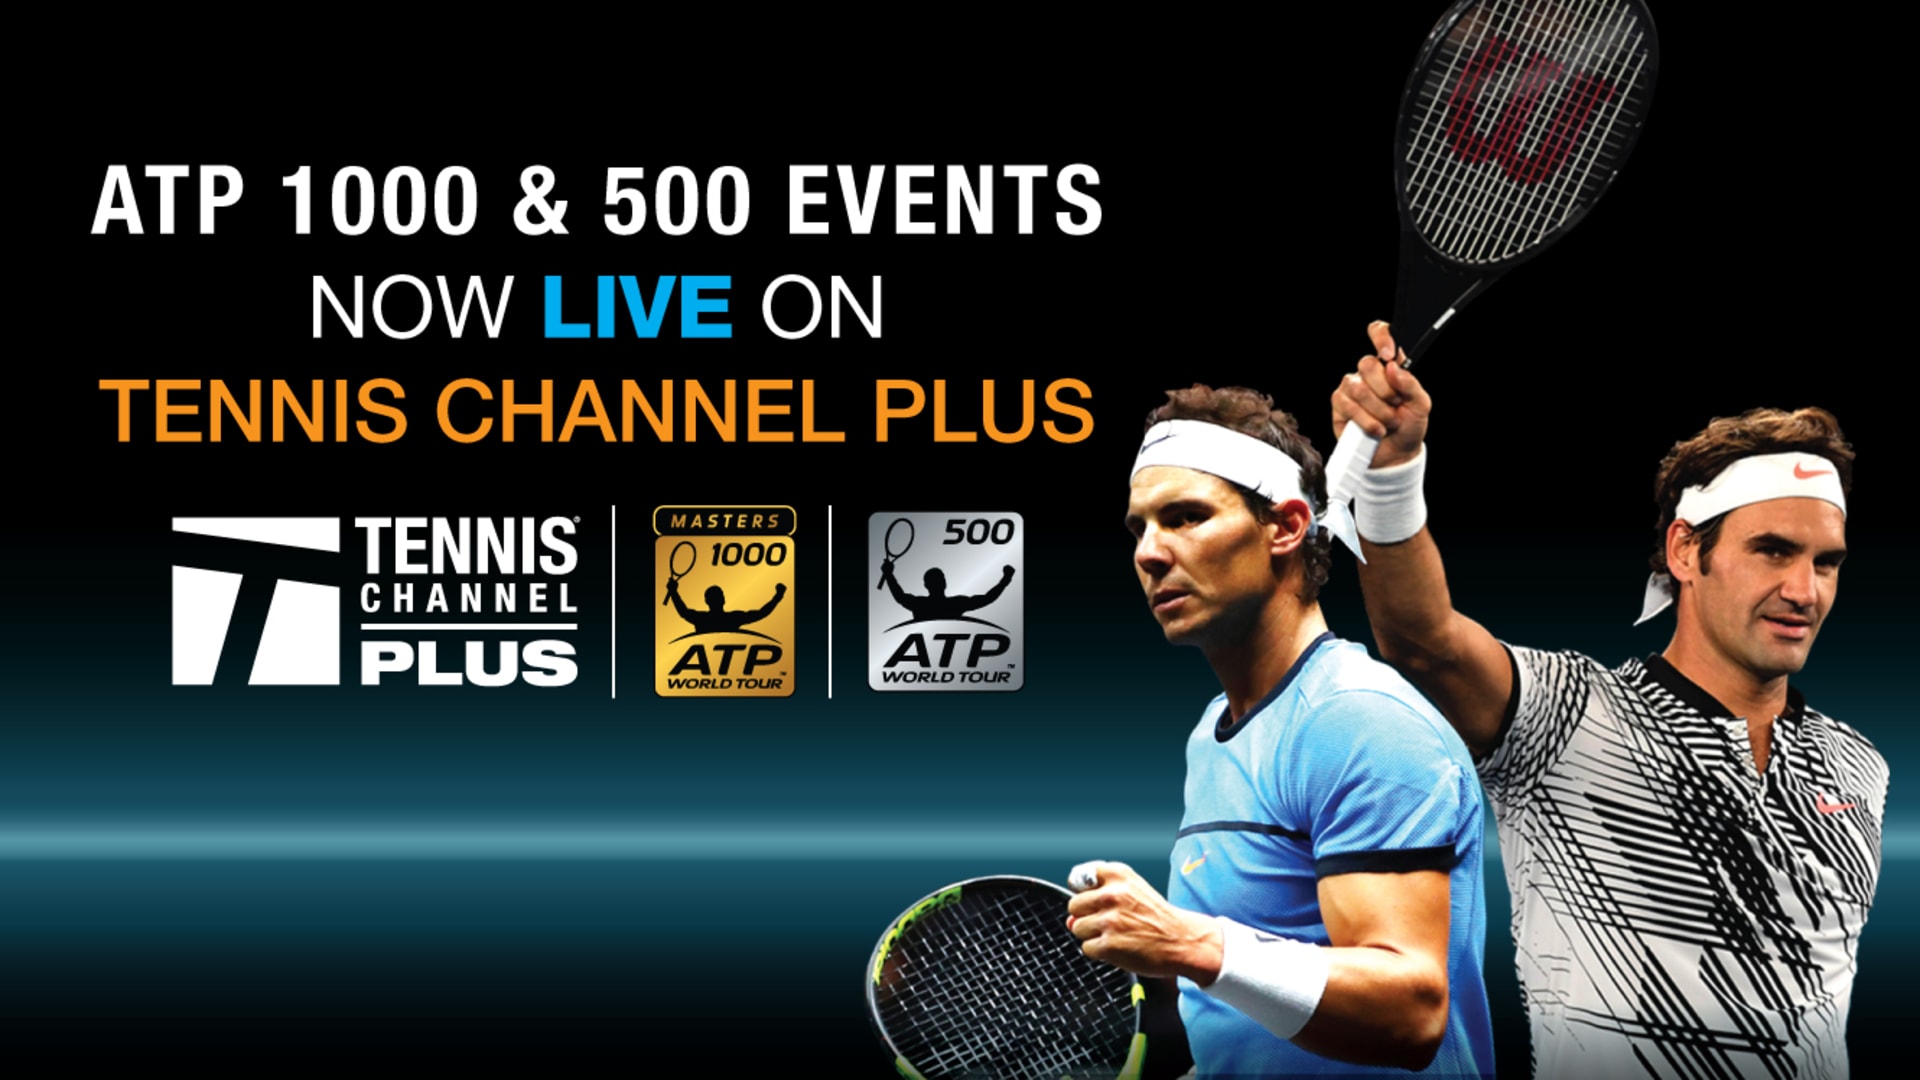 The Tennis Channel is taking its ATP coverage to another level